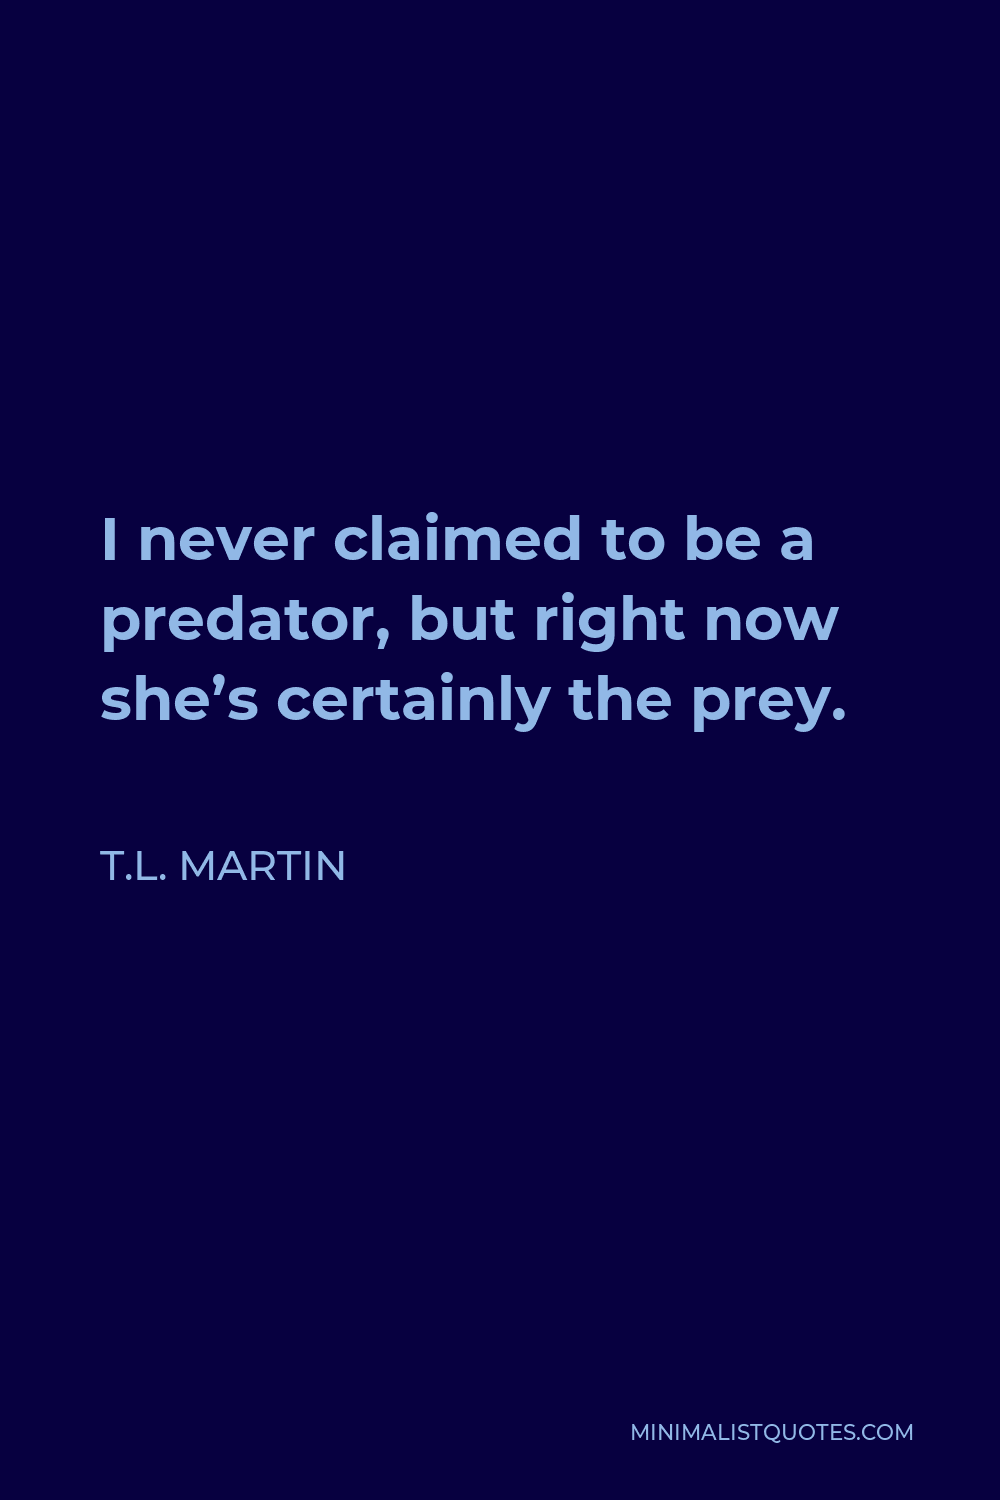 T.L. Martin Quote - I never claimed to be a predator, but right now she’s certainly the prey.